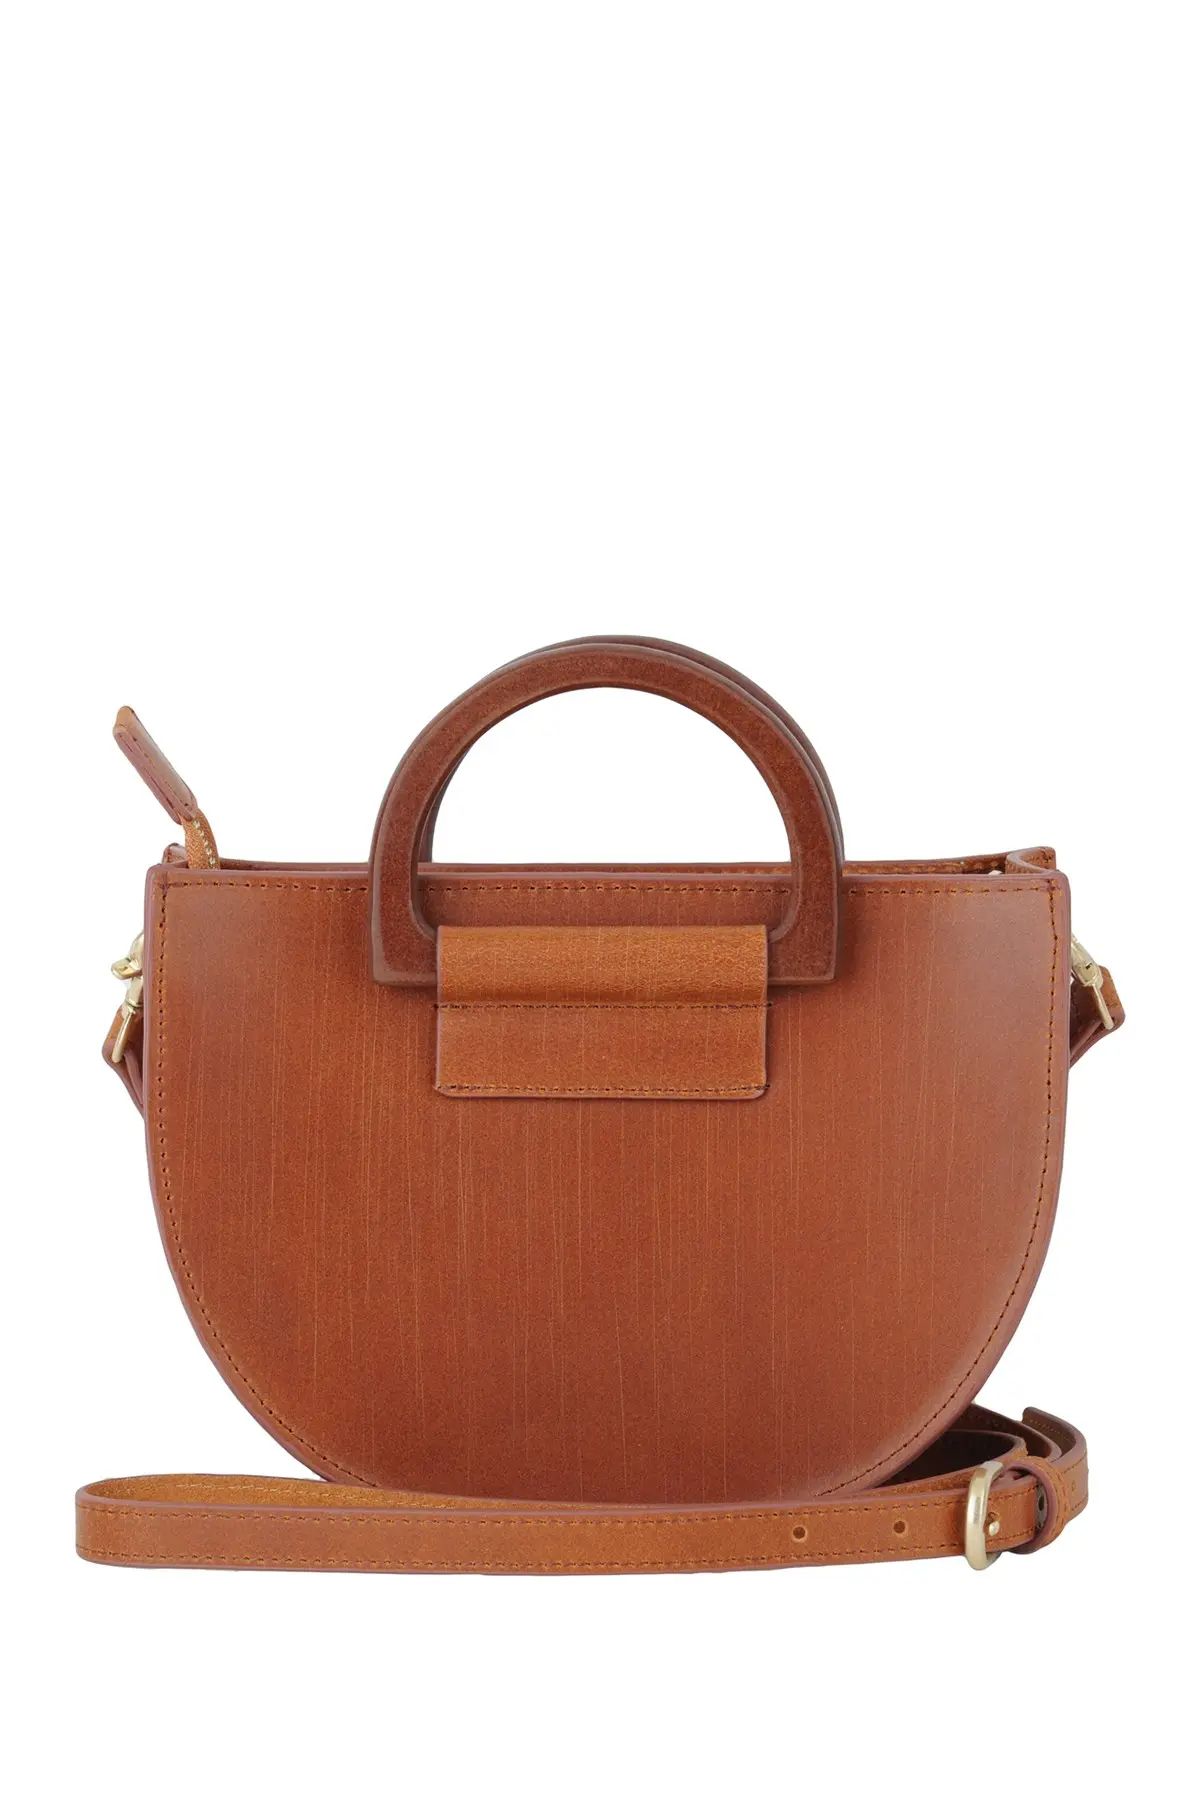 Most Wanted USA Wooden D-Ring Leather Crossbody Bag at Nordstrom Rack | Nordstrom Rack